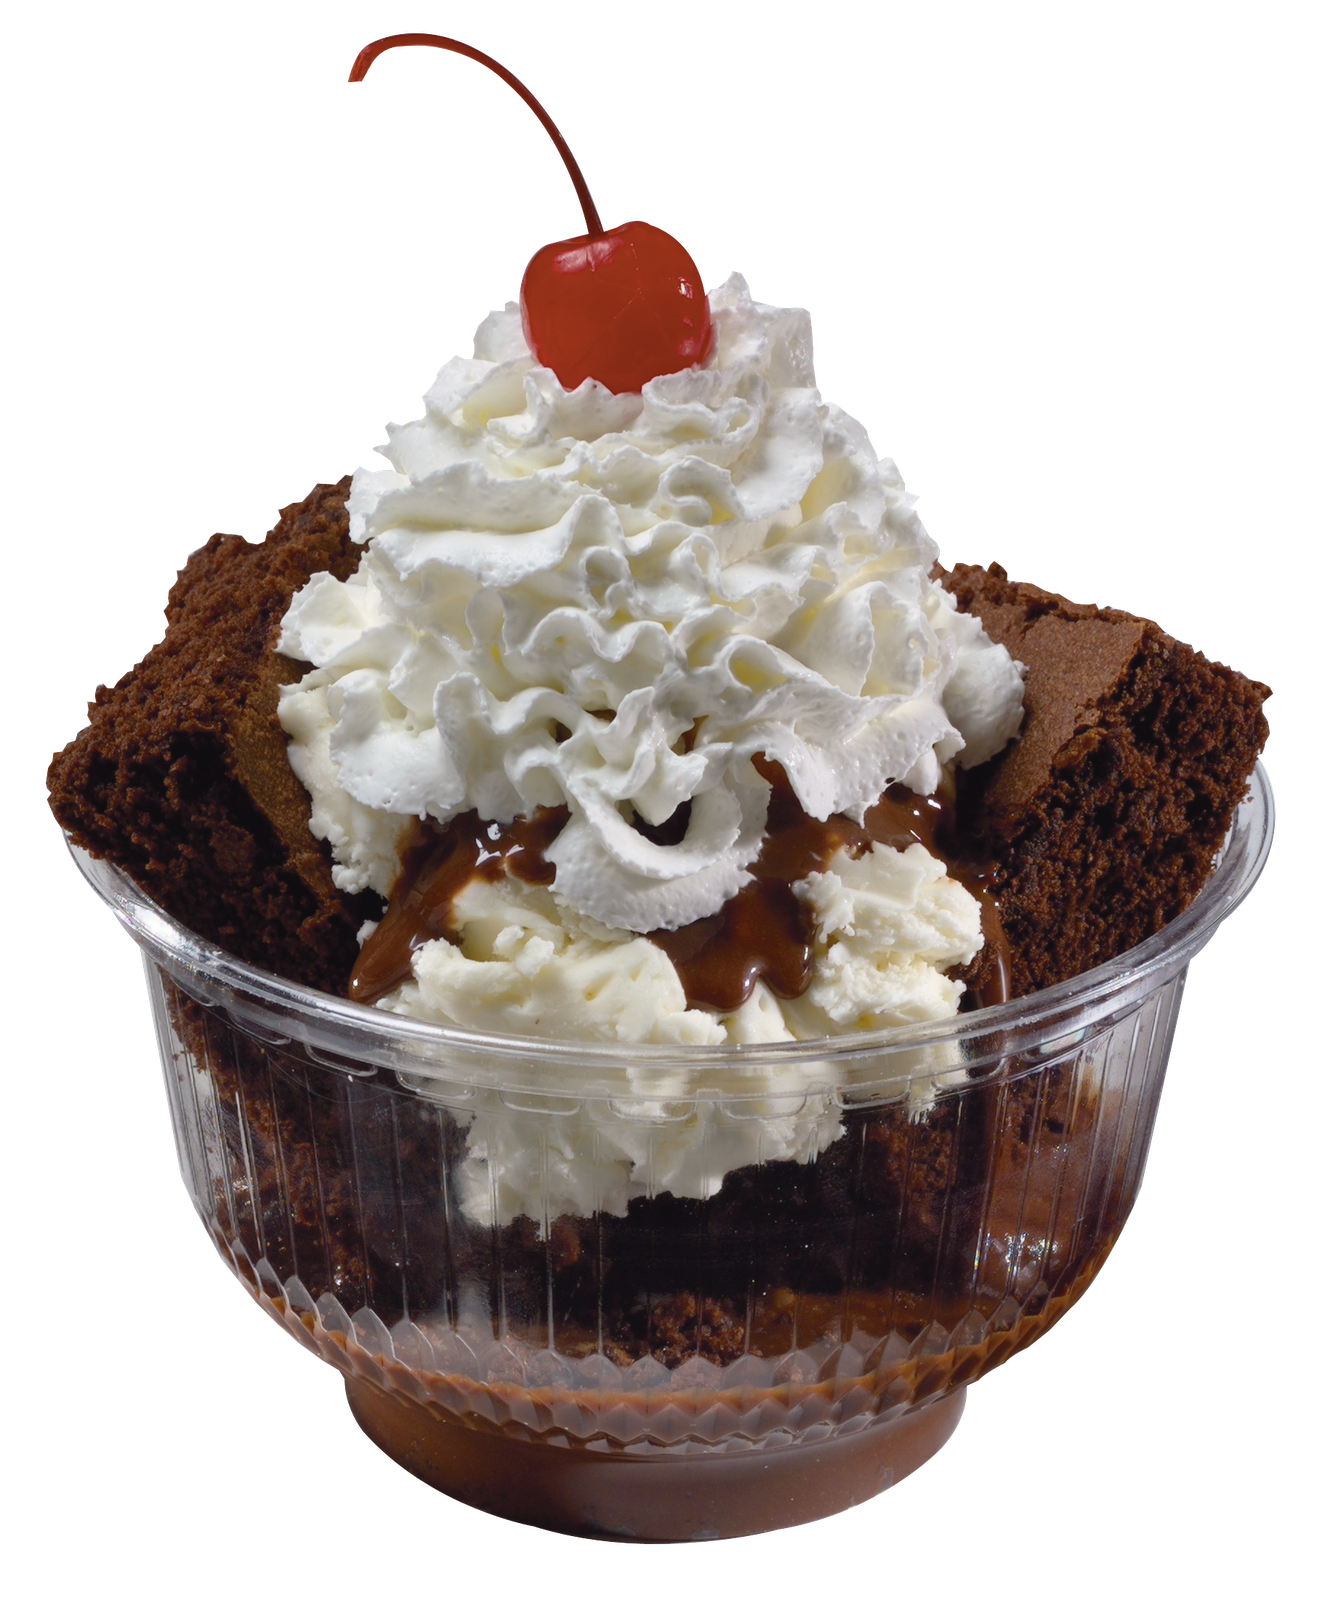 Ice Cream Cup Transparent Image PNG Image